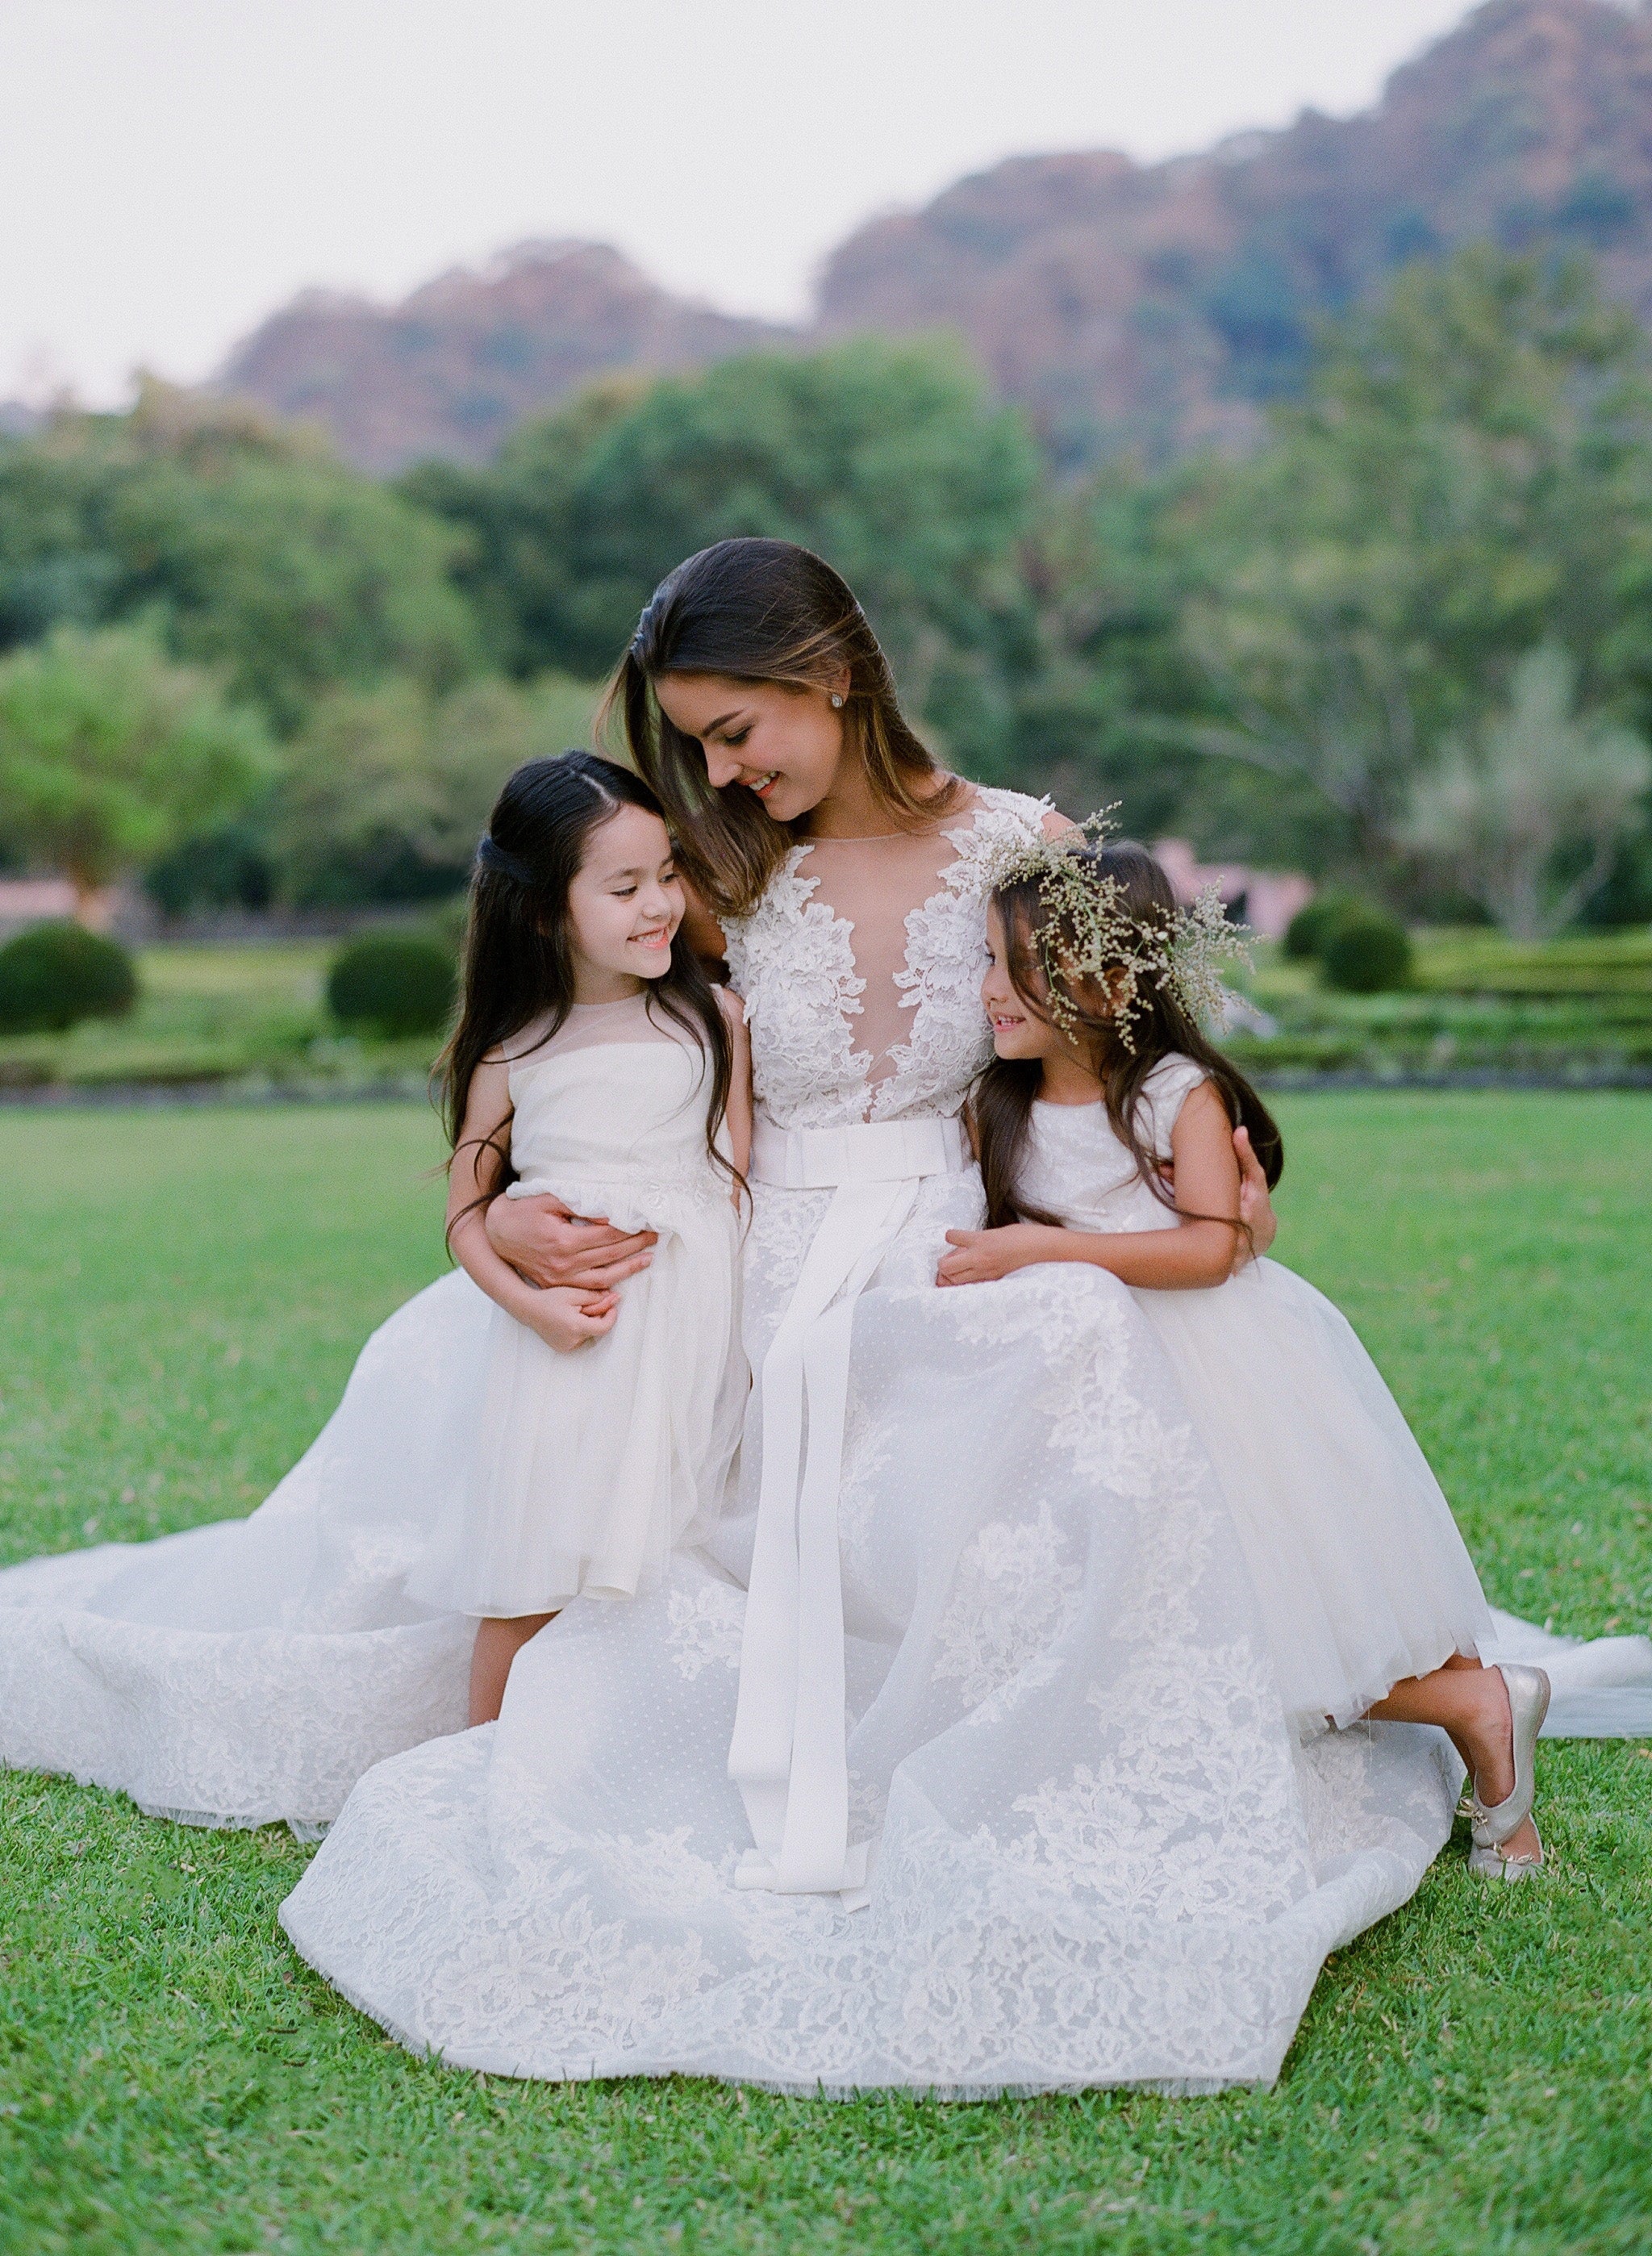 #KleinfeldEditorial We took our newest wedding dresses, bridesmaids dresses and flower girl dresses from Kleinfeld Bridal and Kleinfeld Bridal Party down to the Hacienda San Antonio in Colima Mexico for a stunning editorial photoshoot—here is all the adorable flower girl inspiration you need to get the perfect photos from your photographer!